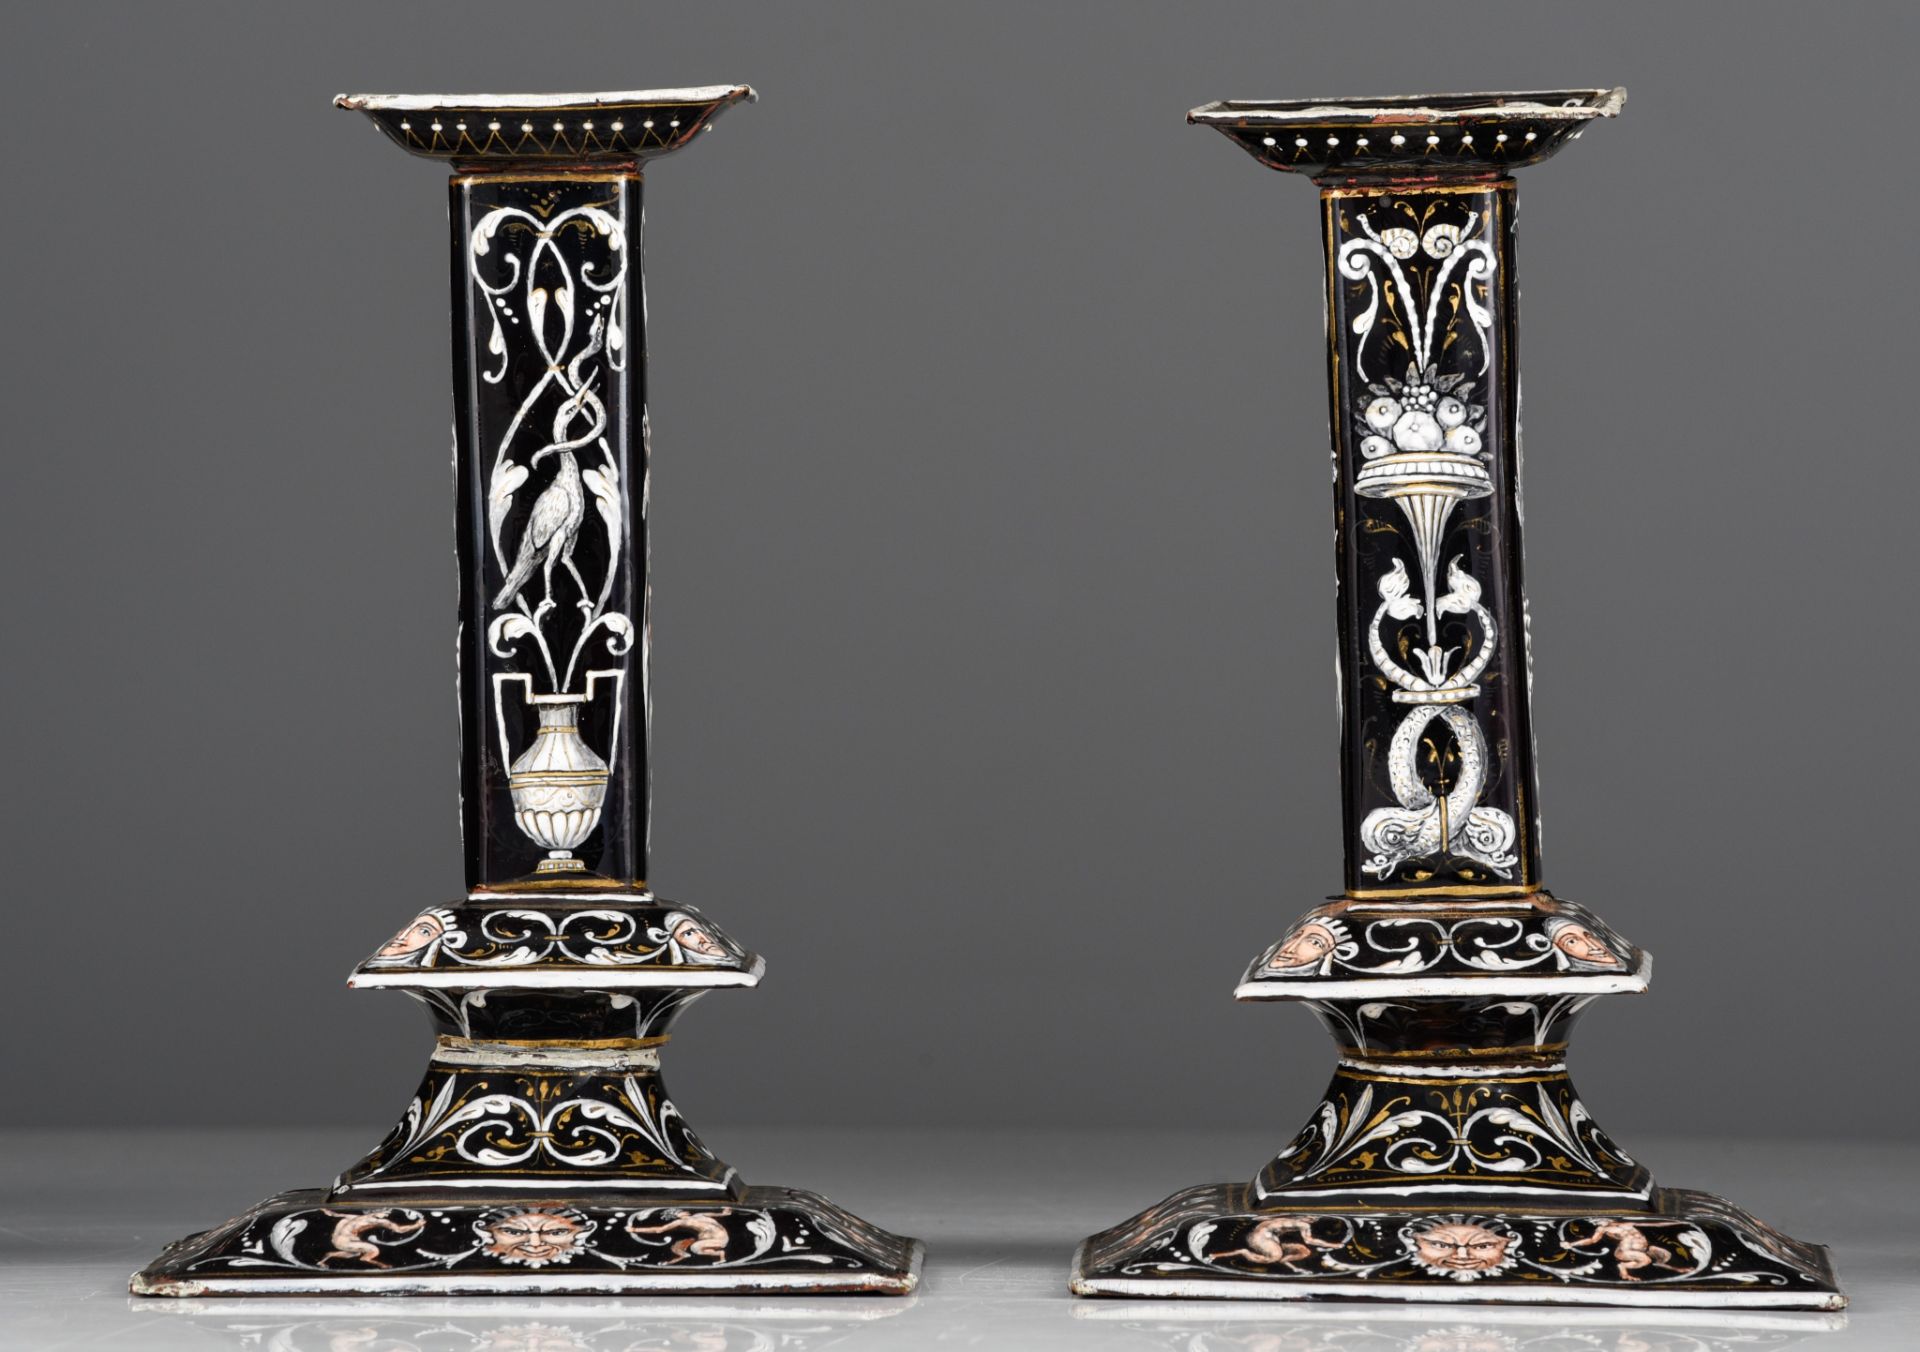 A pair of 17thC Limoges enamel candlesticks, H 23 cm (+) - Image 3 of 7